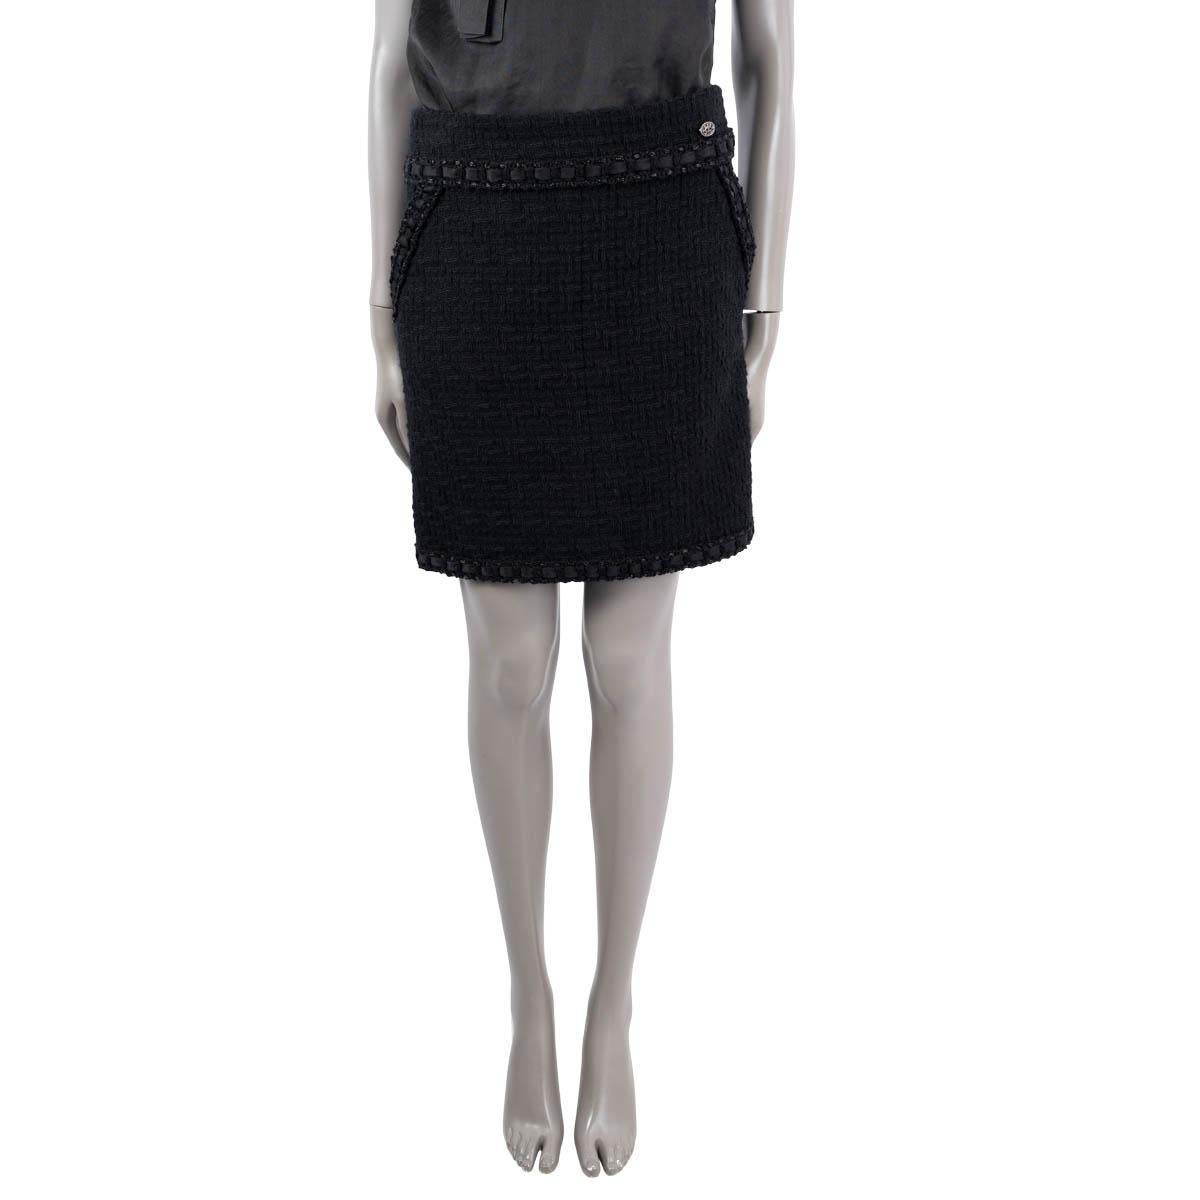 100% authentic Chanel 2016 tweed mini skirt in black wool (100%). Features a satin ribbon trim and two slant pockets on the front. Opens with a concealed zipper and a hook in the back. Lined in silk (100%). Has been worn and is in excellent